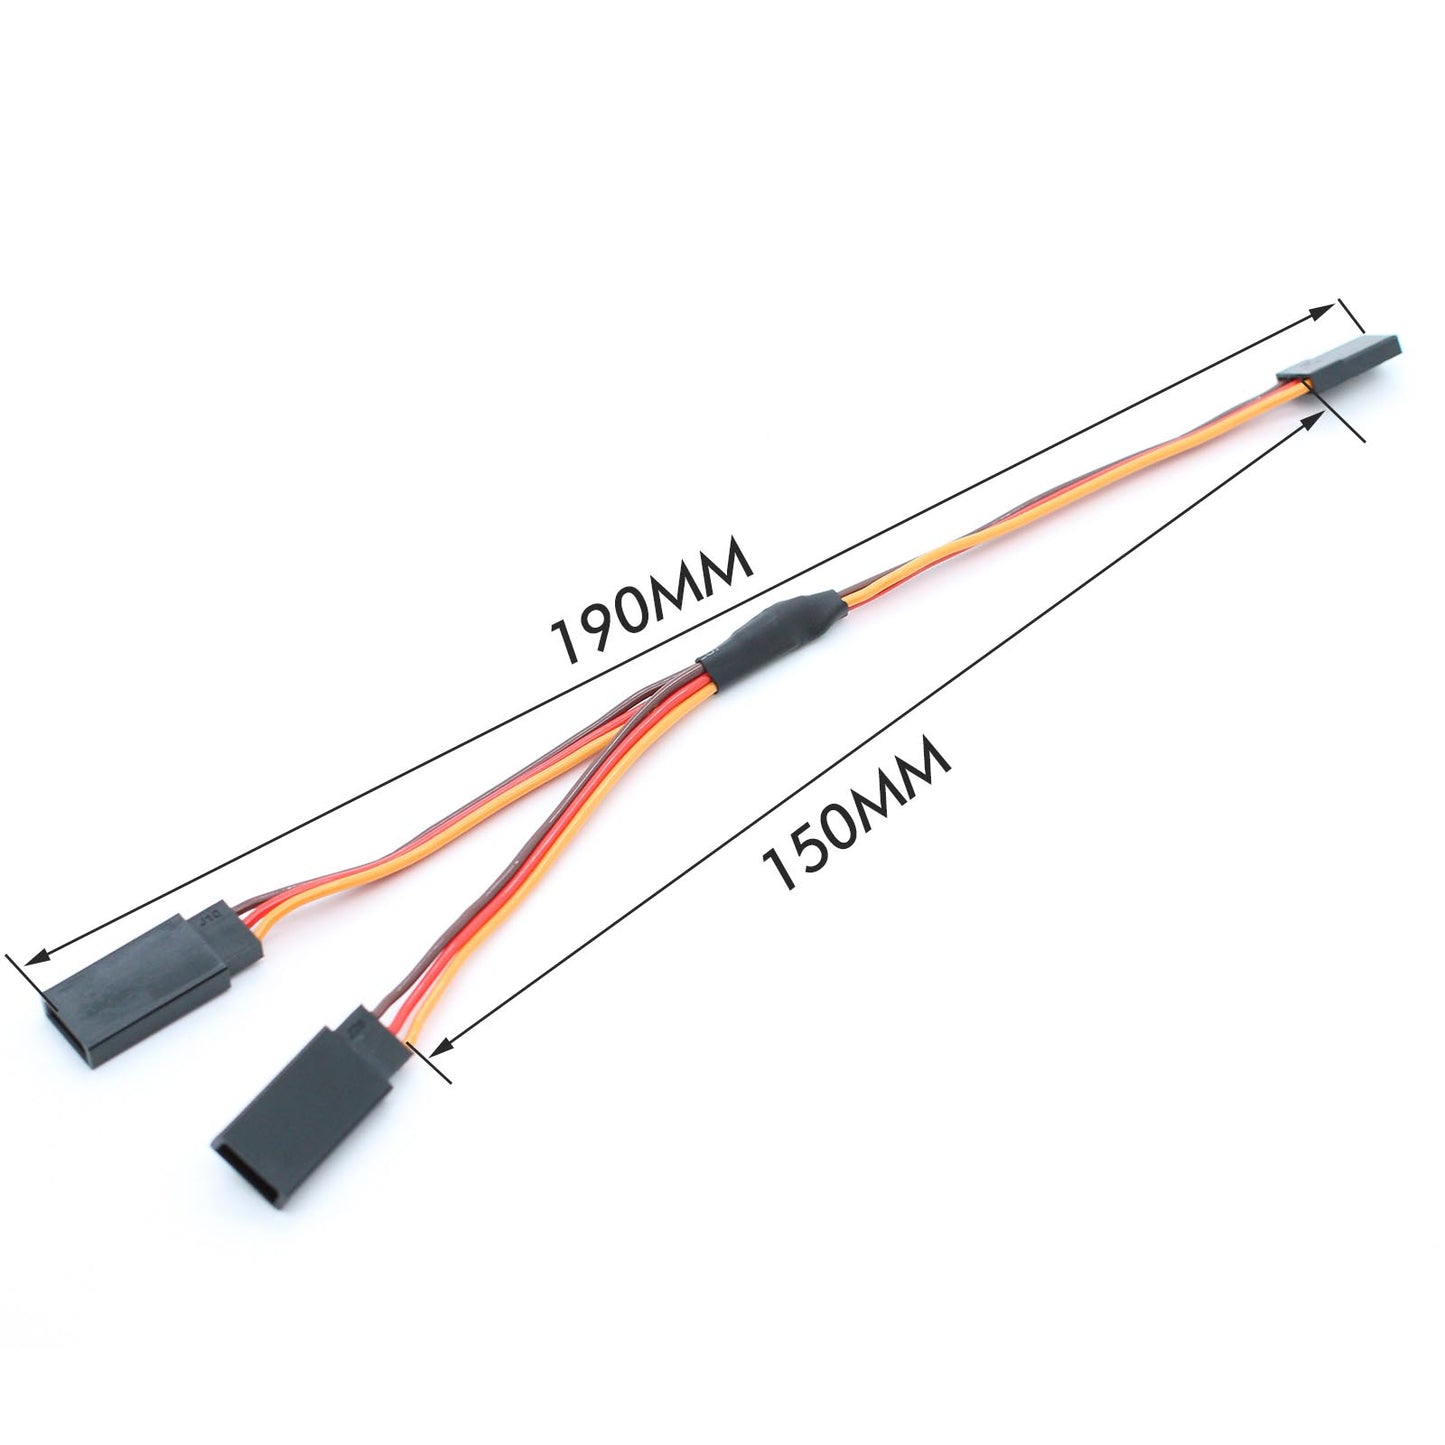 3 Pin JR Servo Extension Cable 1 JR Male to 2 Female JR Y Harness Servo Cable for RC Cars Trucks Airplanes Servo Receiver Connection 5 Pack